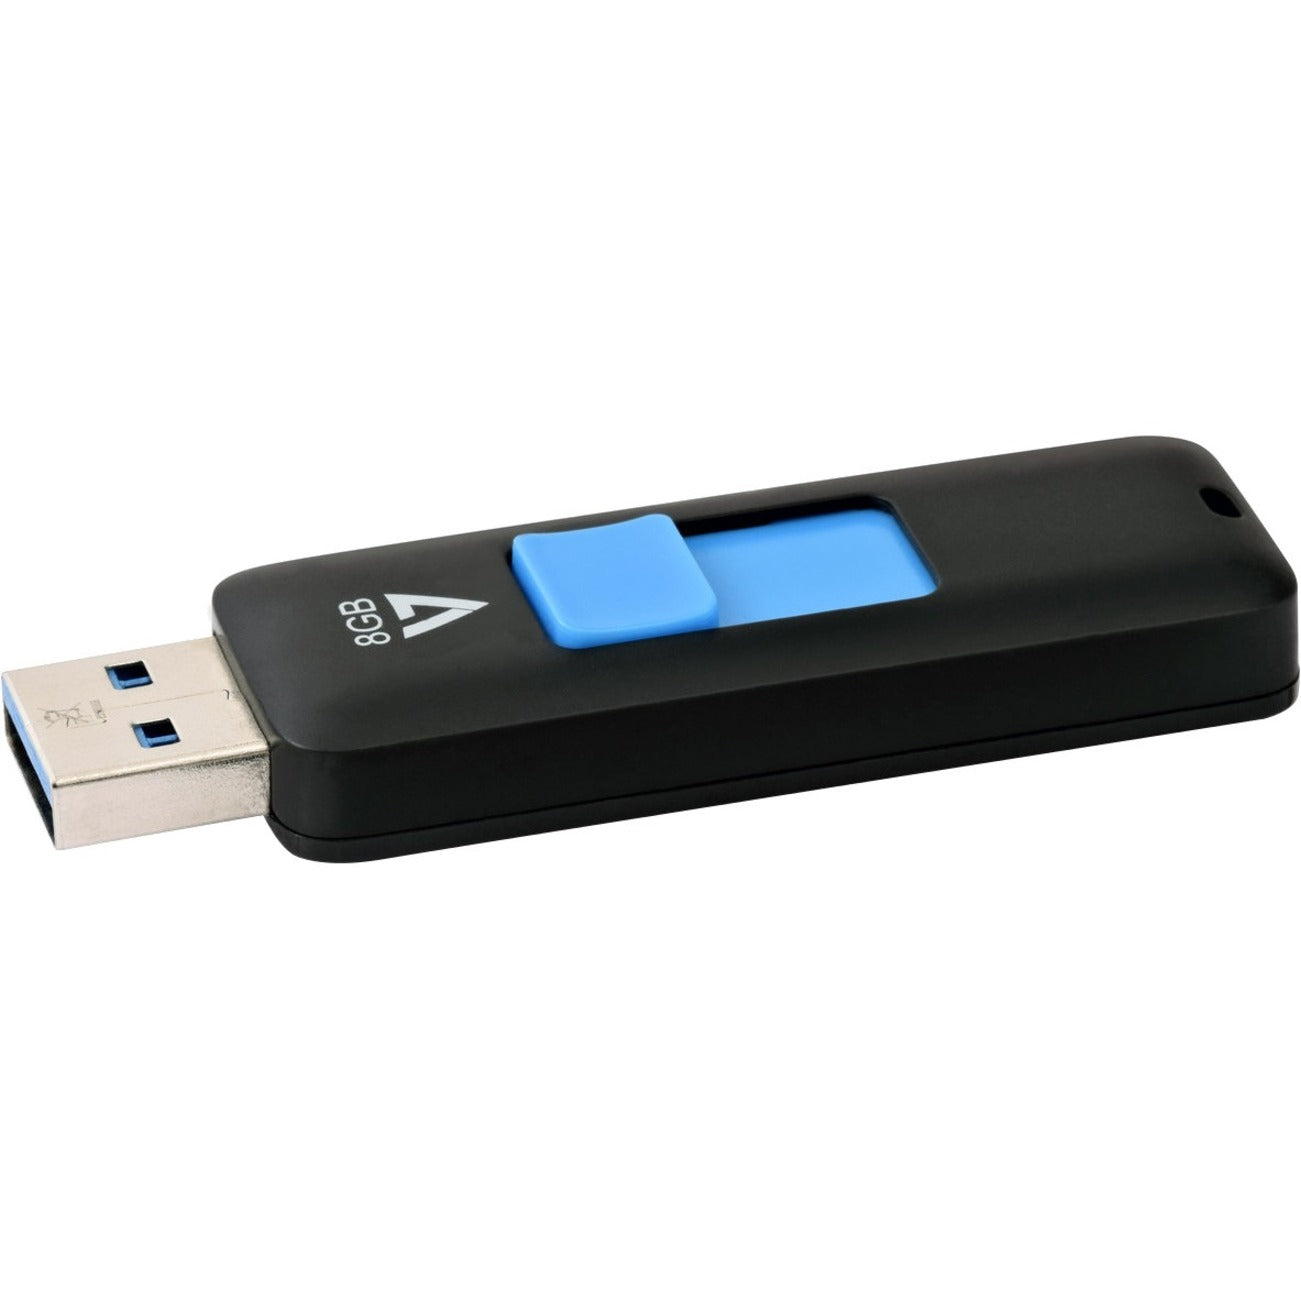 V7 VF38GAR-3N 8GB USB 3.0 Flash Drive - With Retractable USB connector, 5 Year Limited Warranty, RoHS Certified